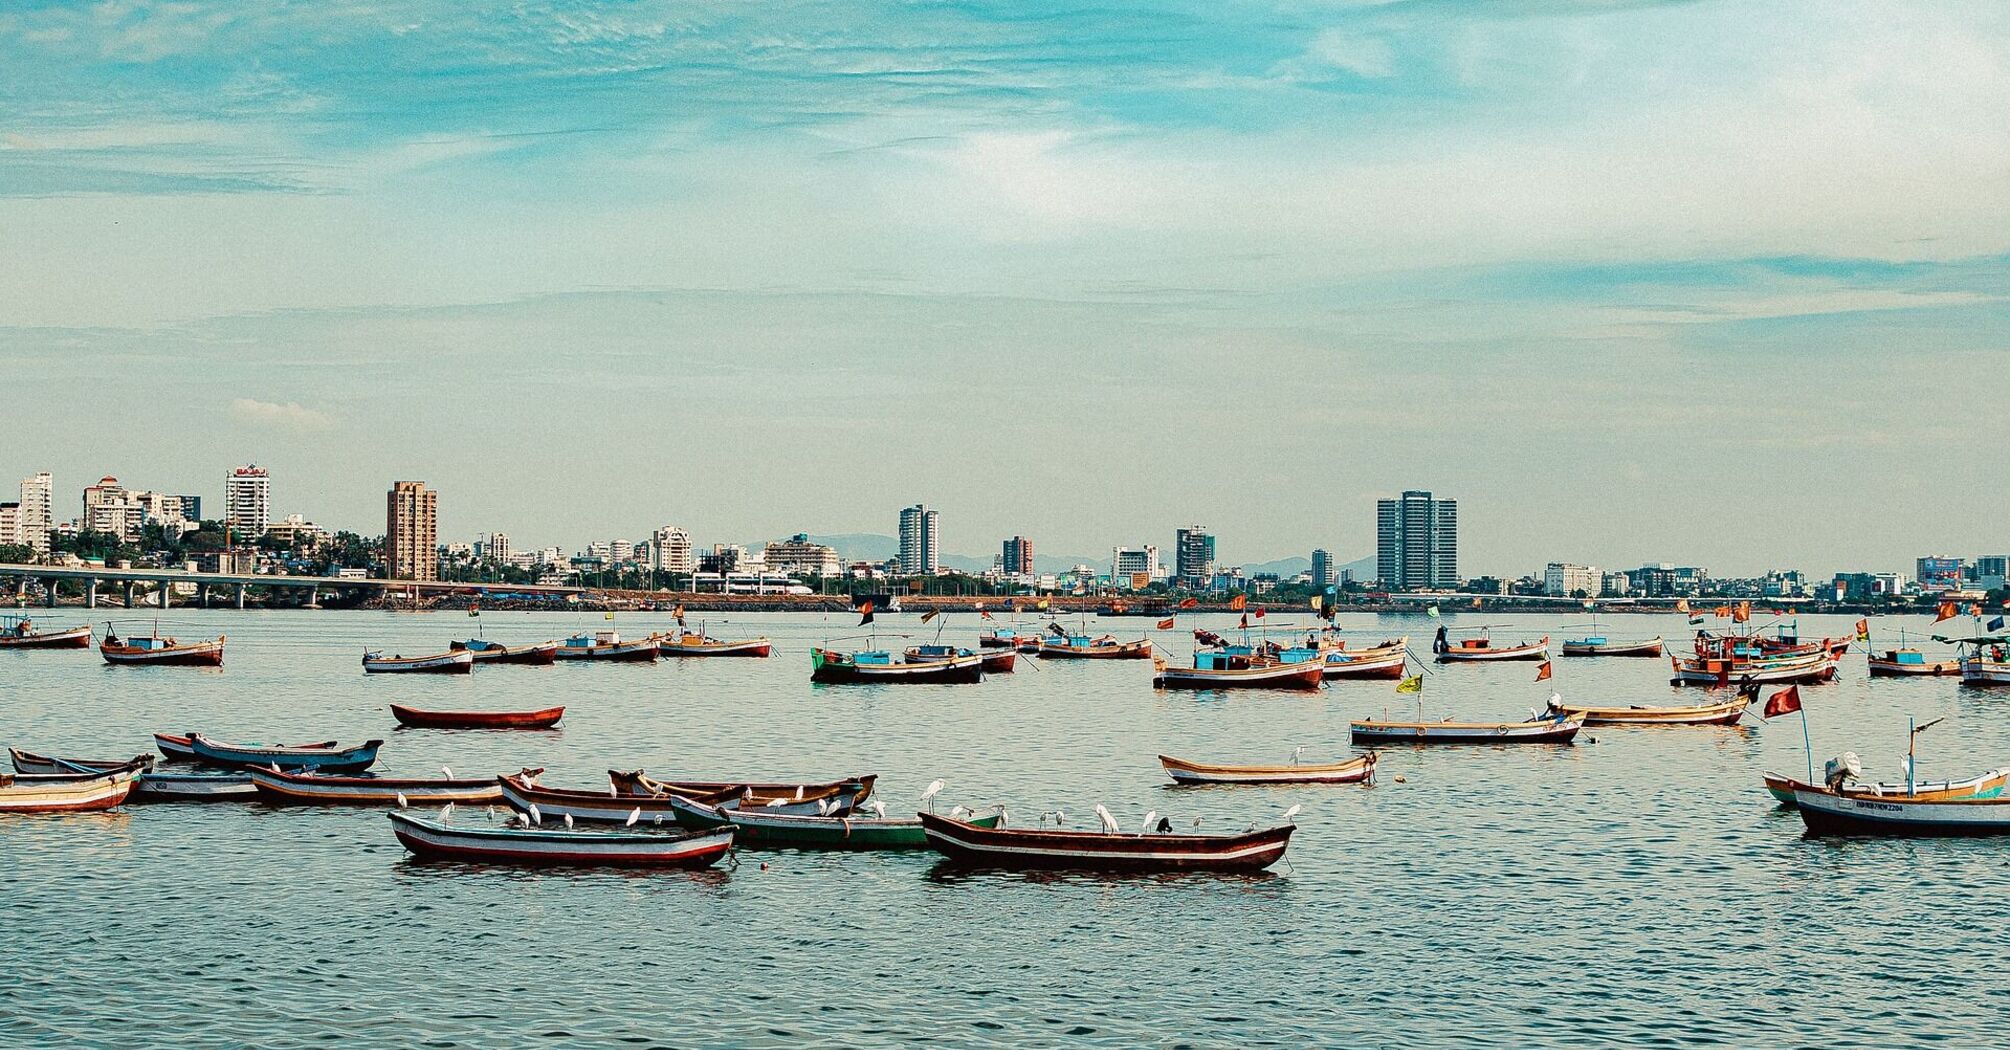 Boats in Mumbai with city skyline in the background